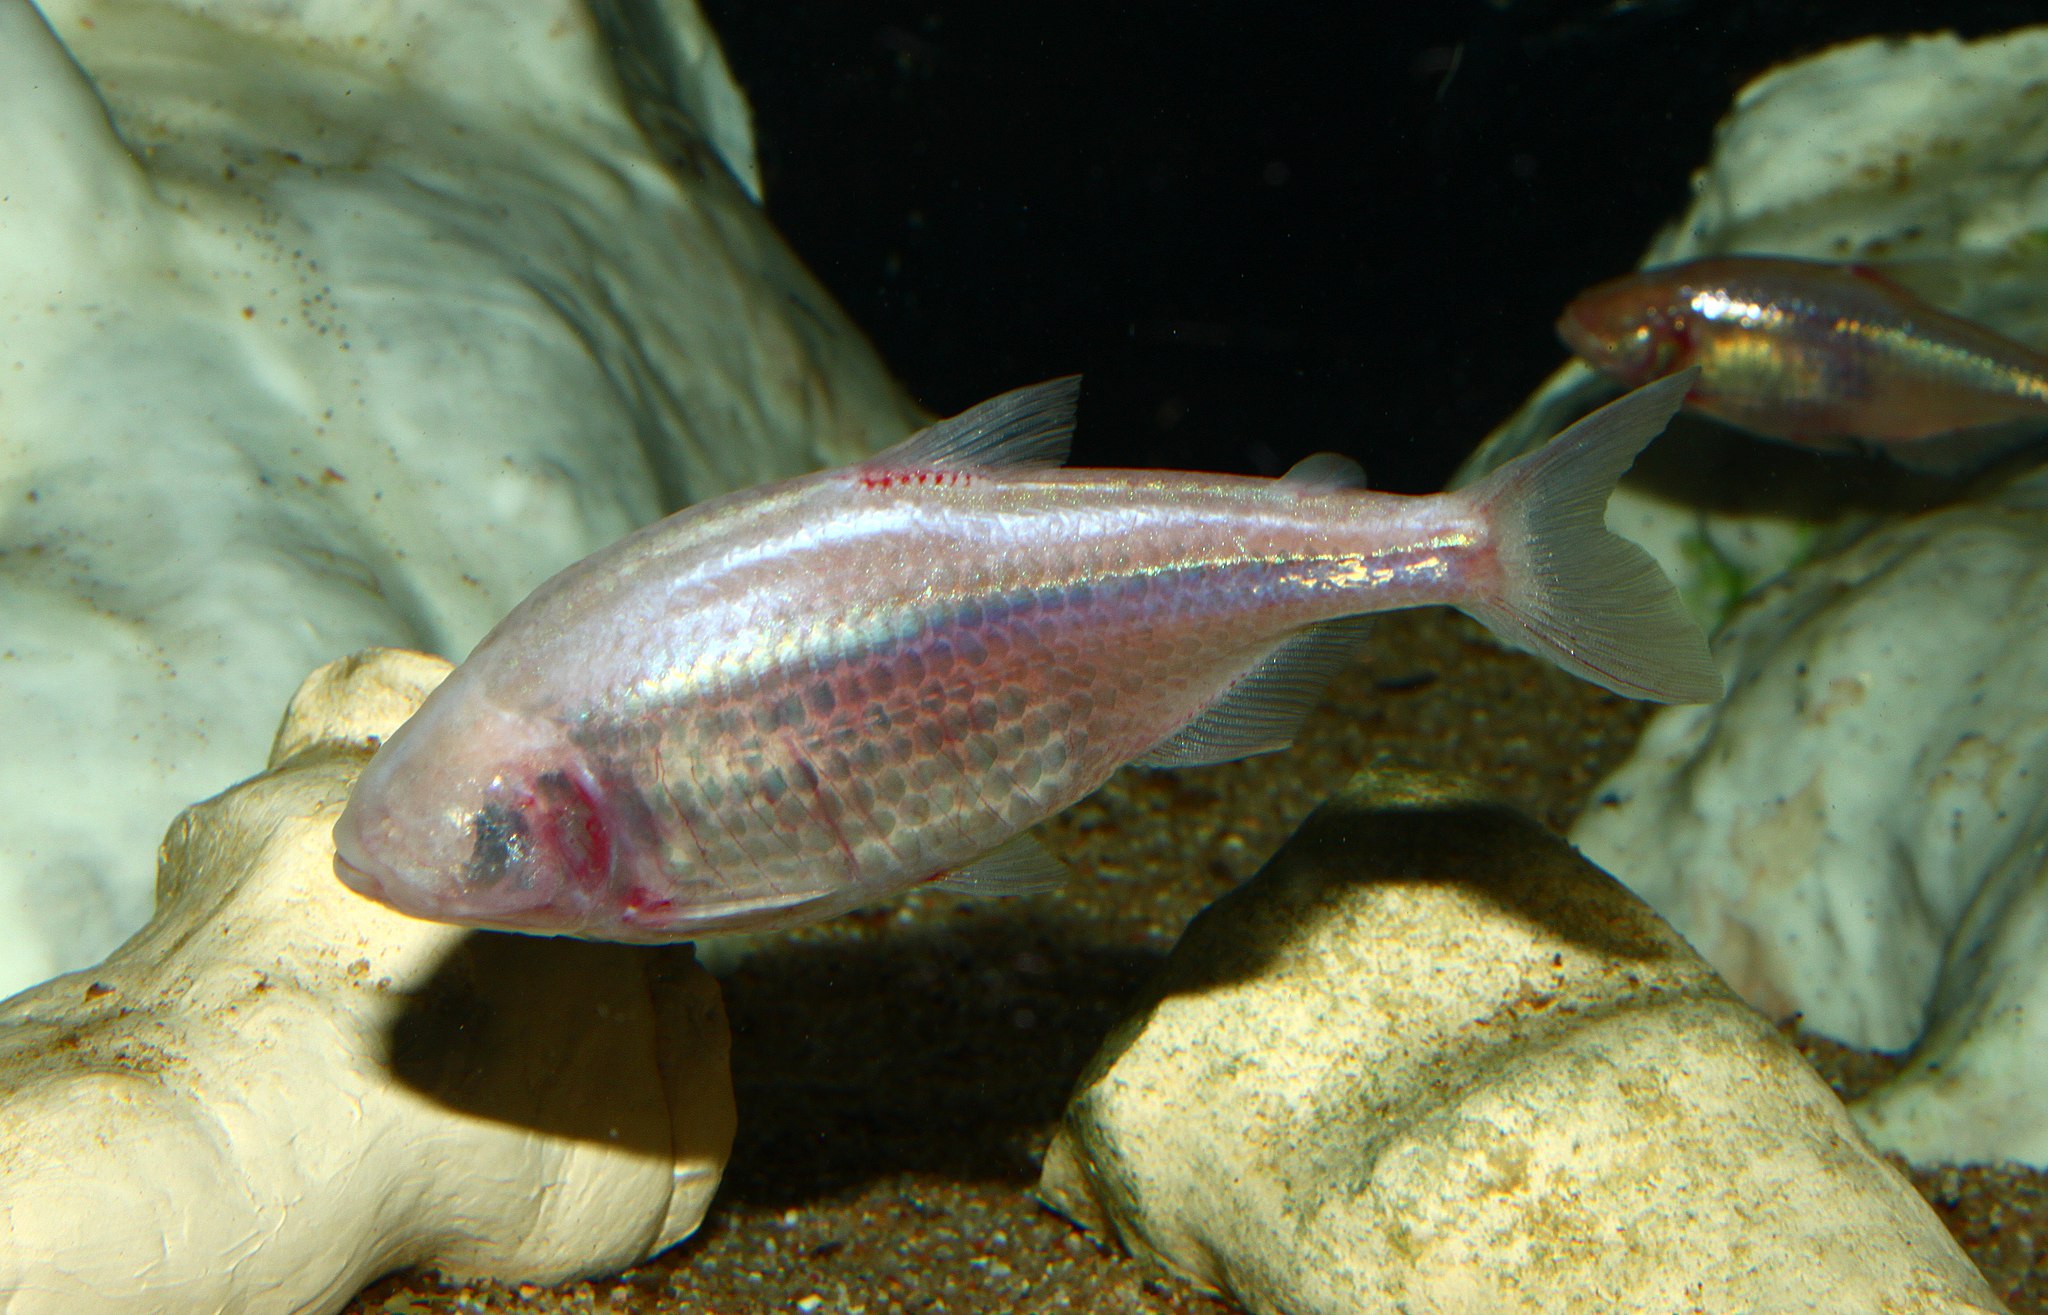 The Mexican Tetra cave fish is brighter and has more sensitive taste buds than fish of the same species that live in rivers, but unlike those, it cannot regenerate heart muscle. Image credit - H.Zell/Wikimedia Commons, licensed under CC BY 3.0